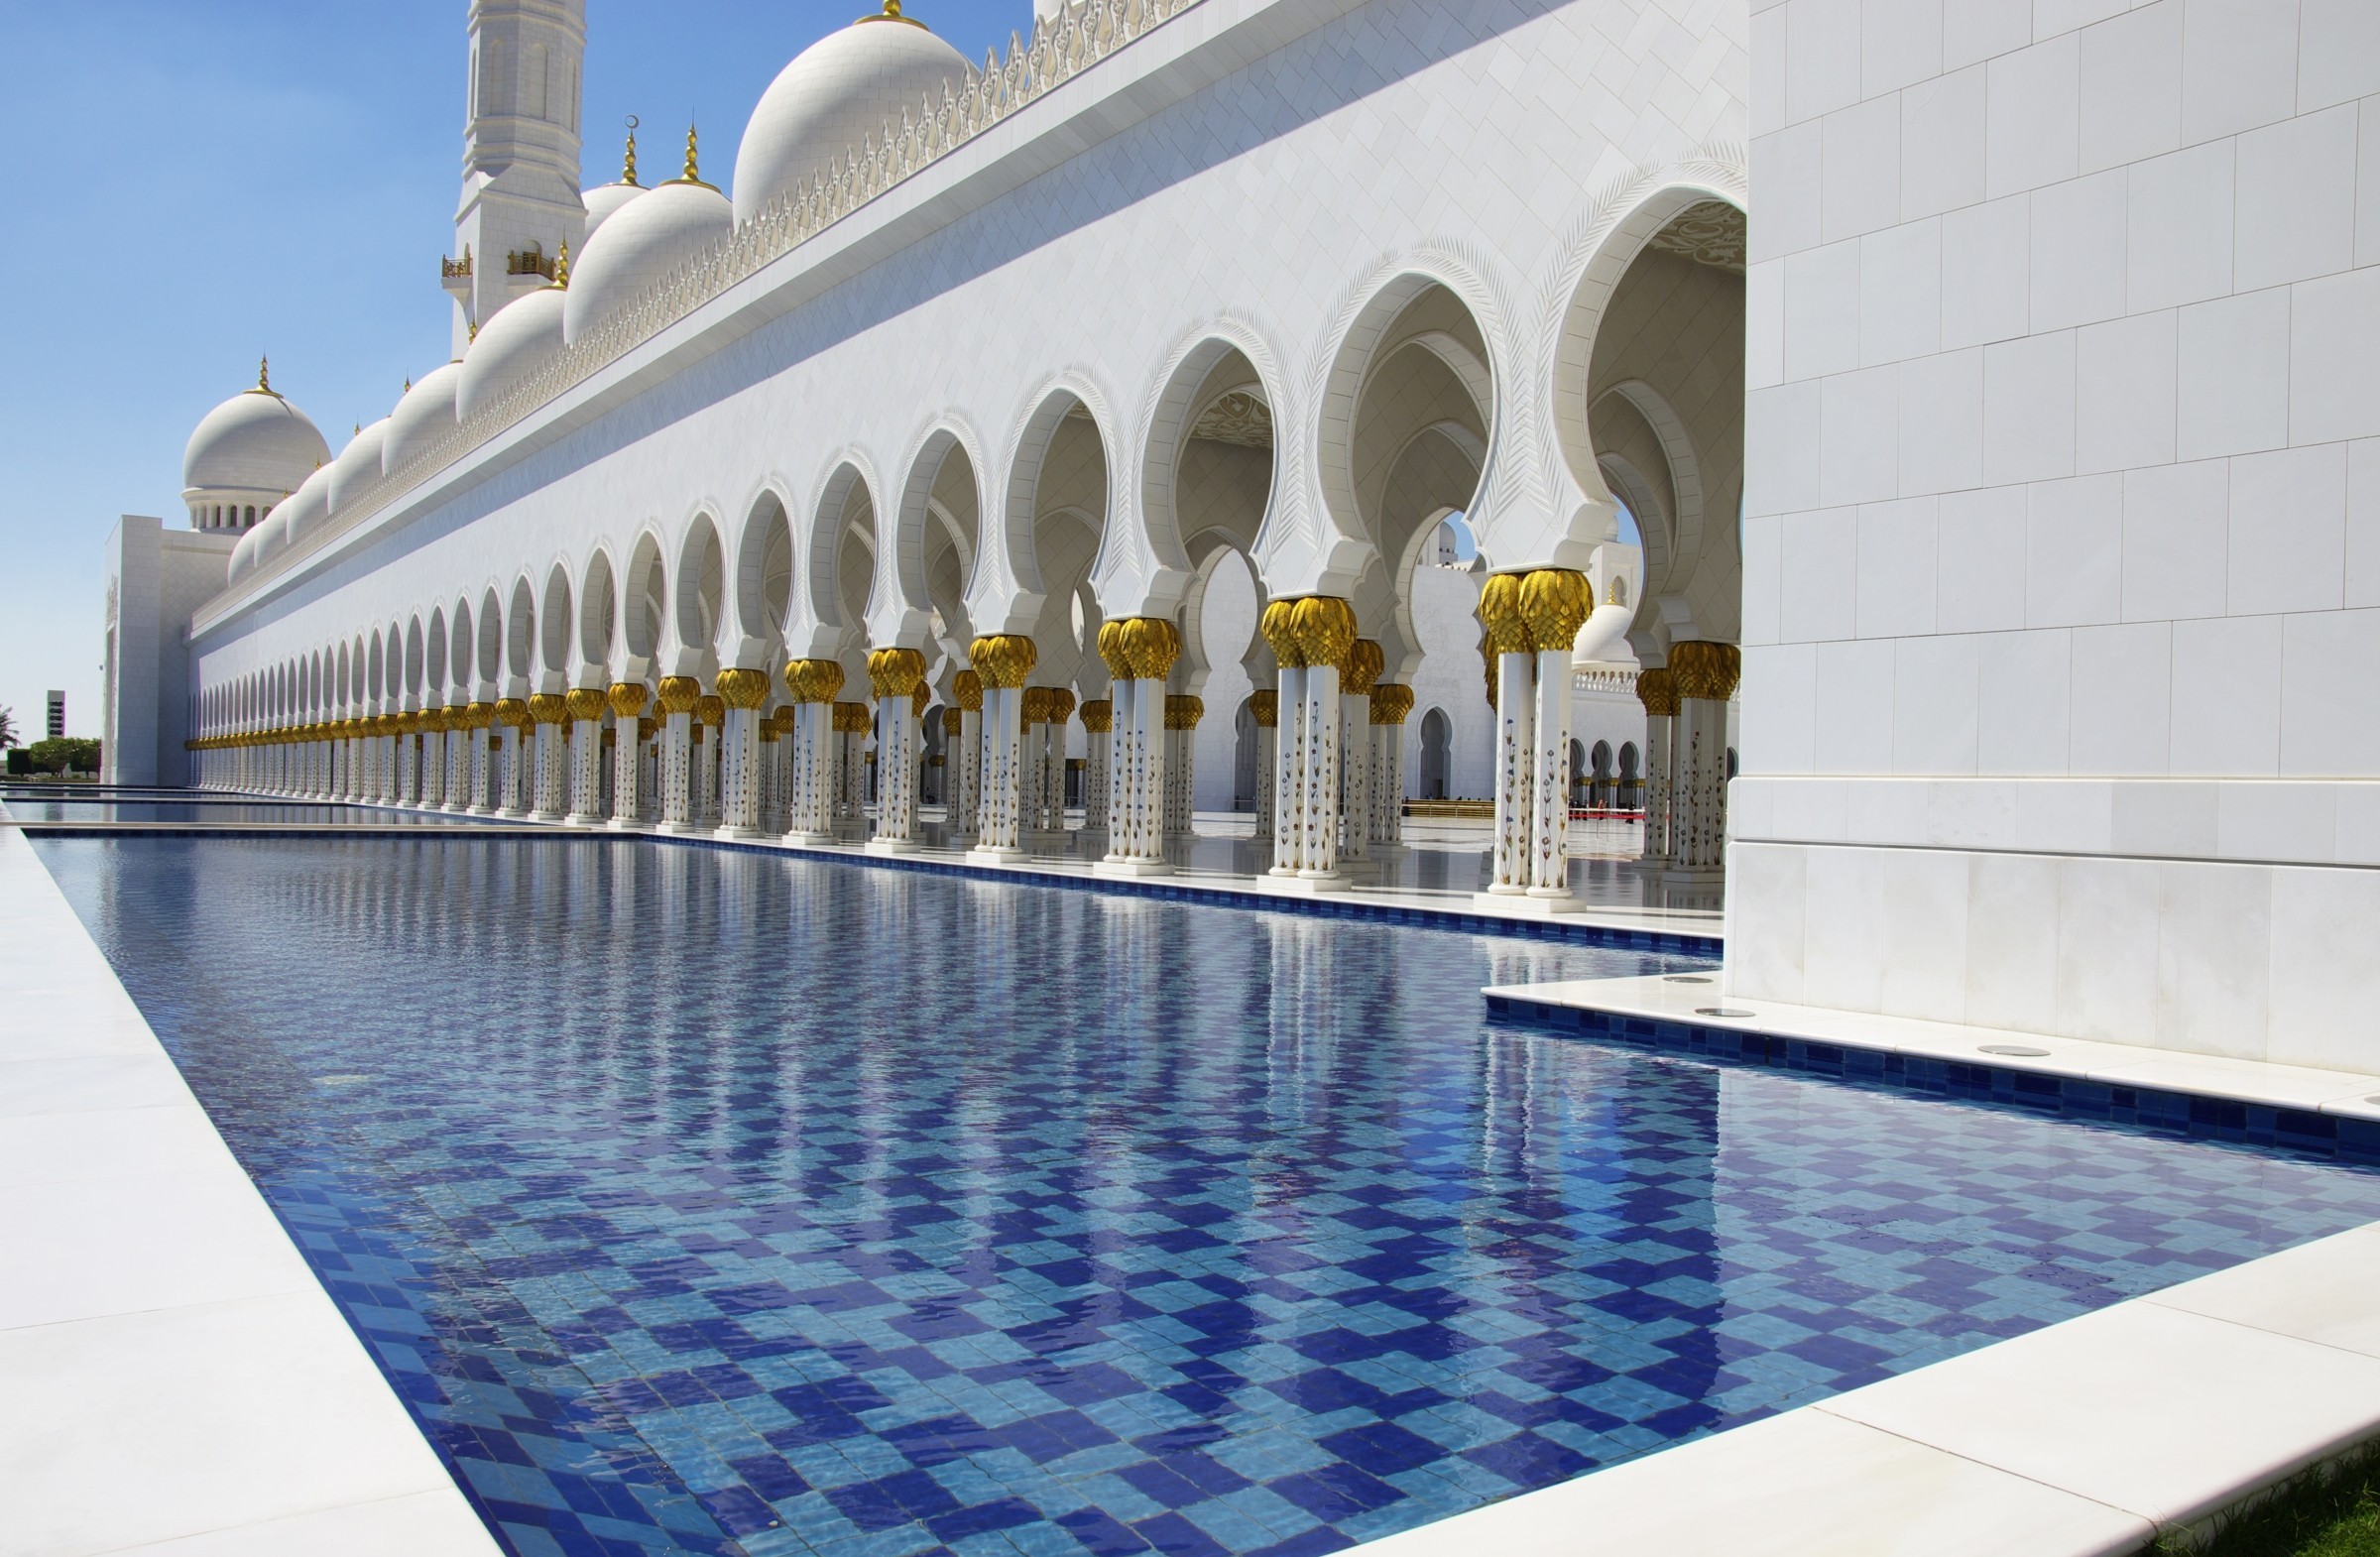 Cool Wallpapers religious, sheikh zayed grand mosque, abu dhabi, mosque, pool, united arab emirates, mosques